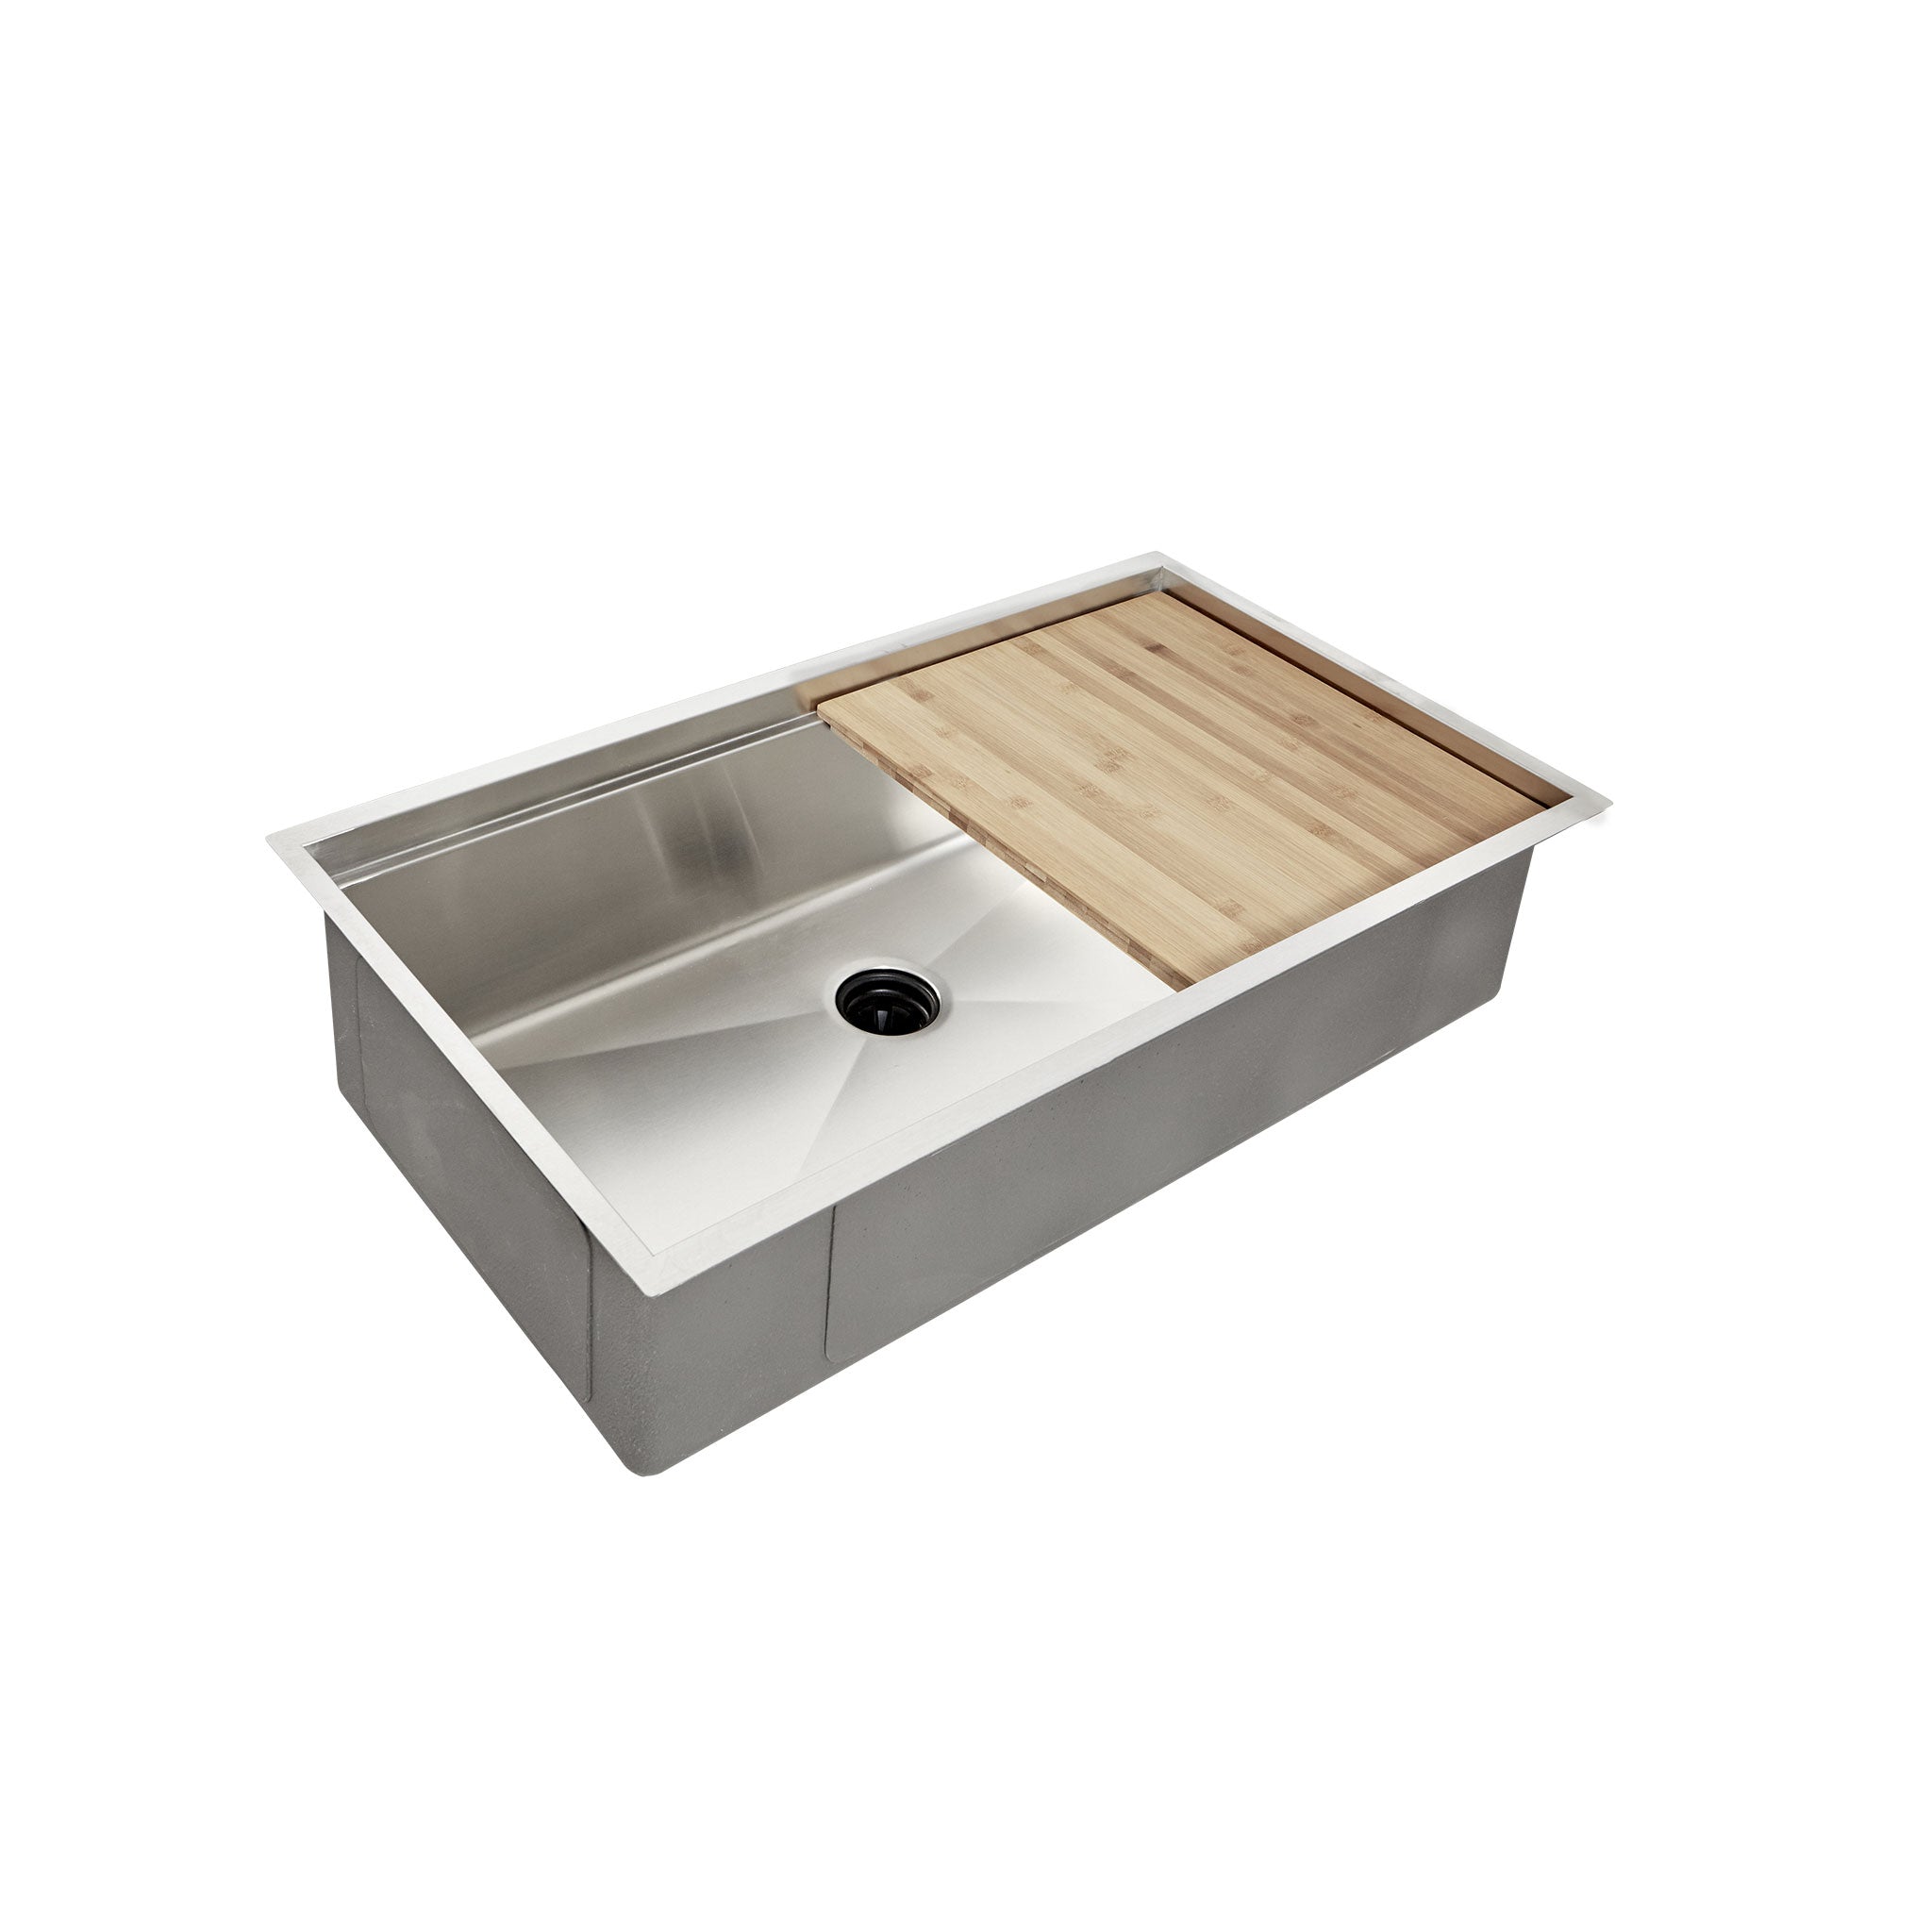 Bamboo accessory in Create Good Sinks 33 inch workstation sink with middle drain